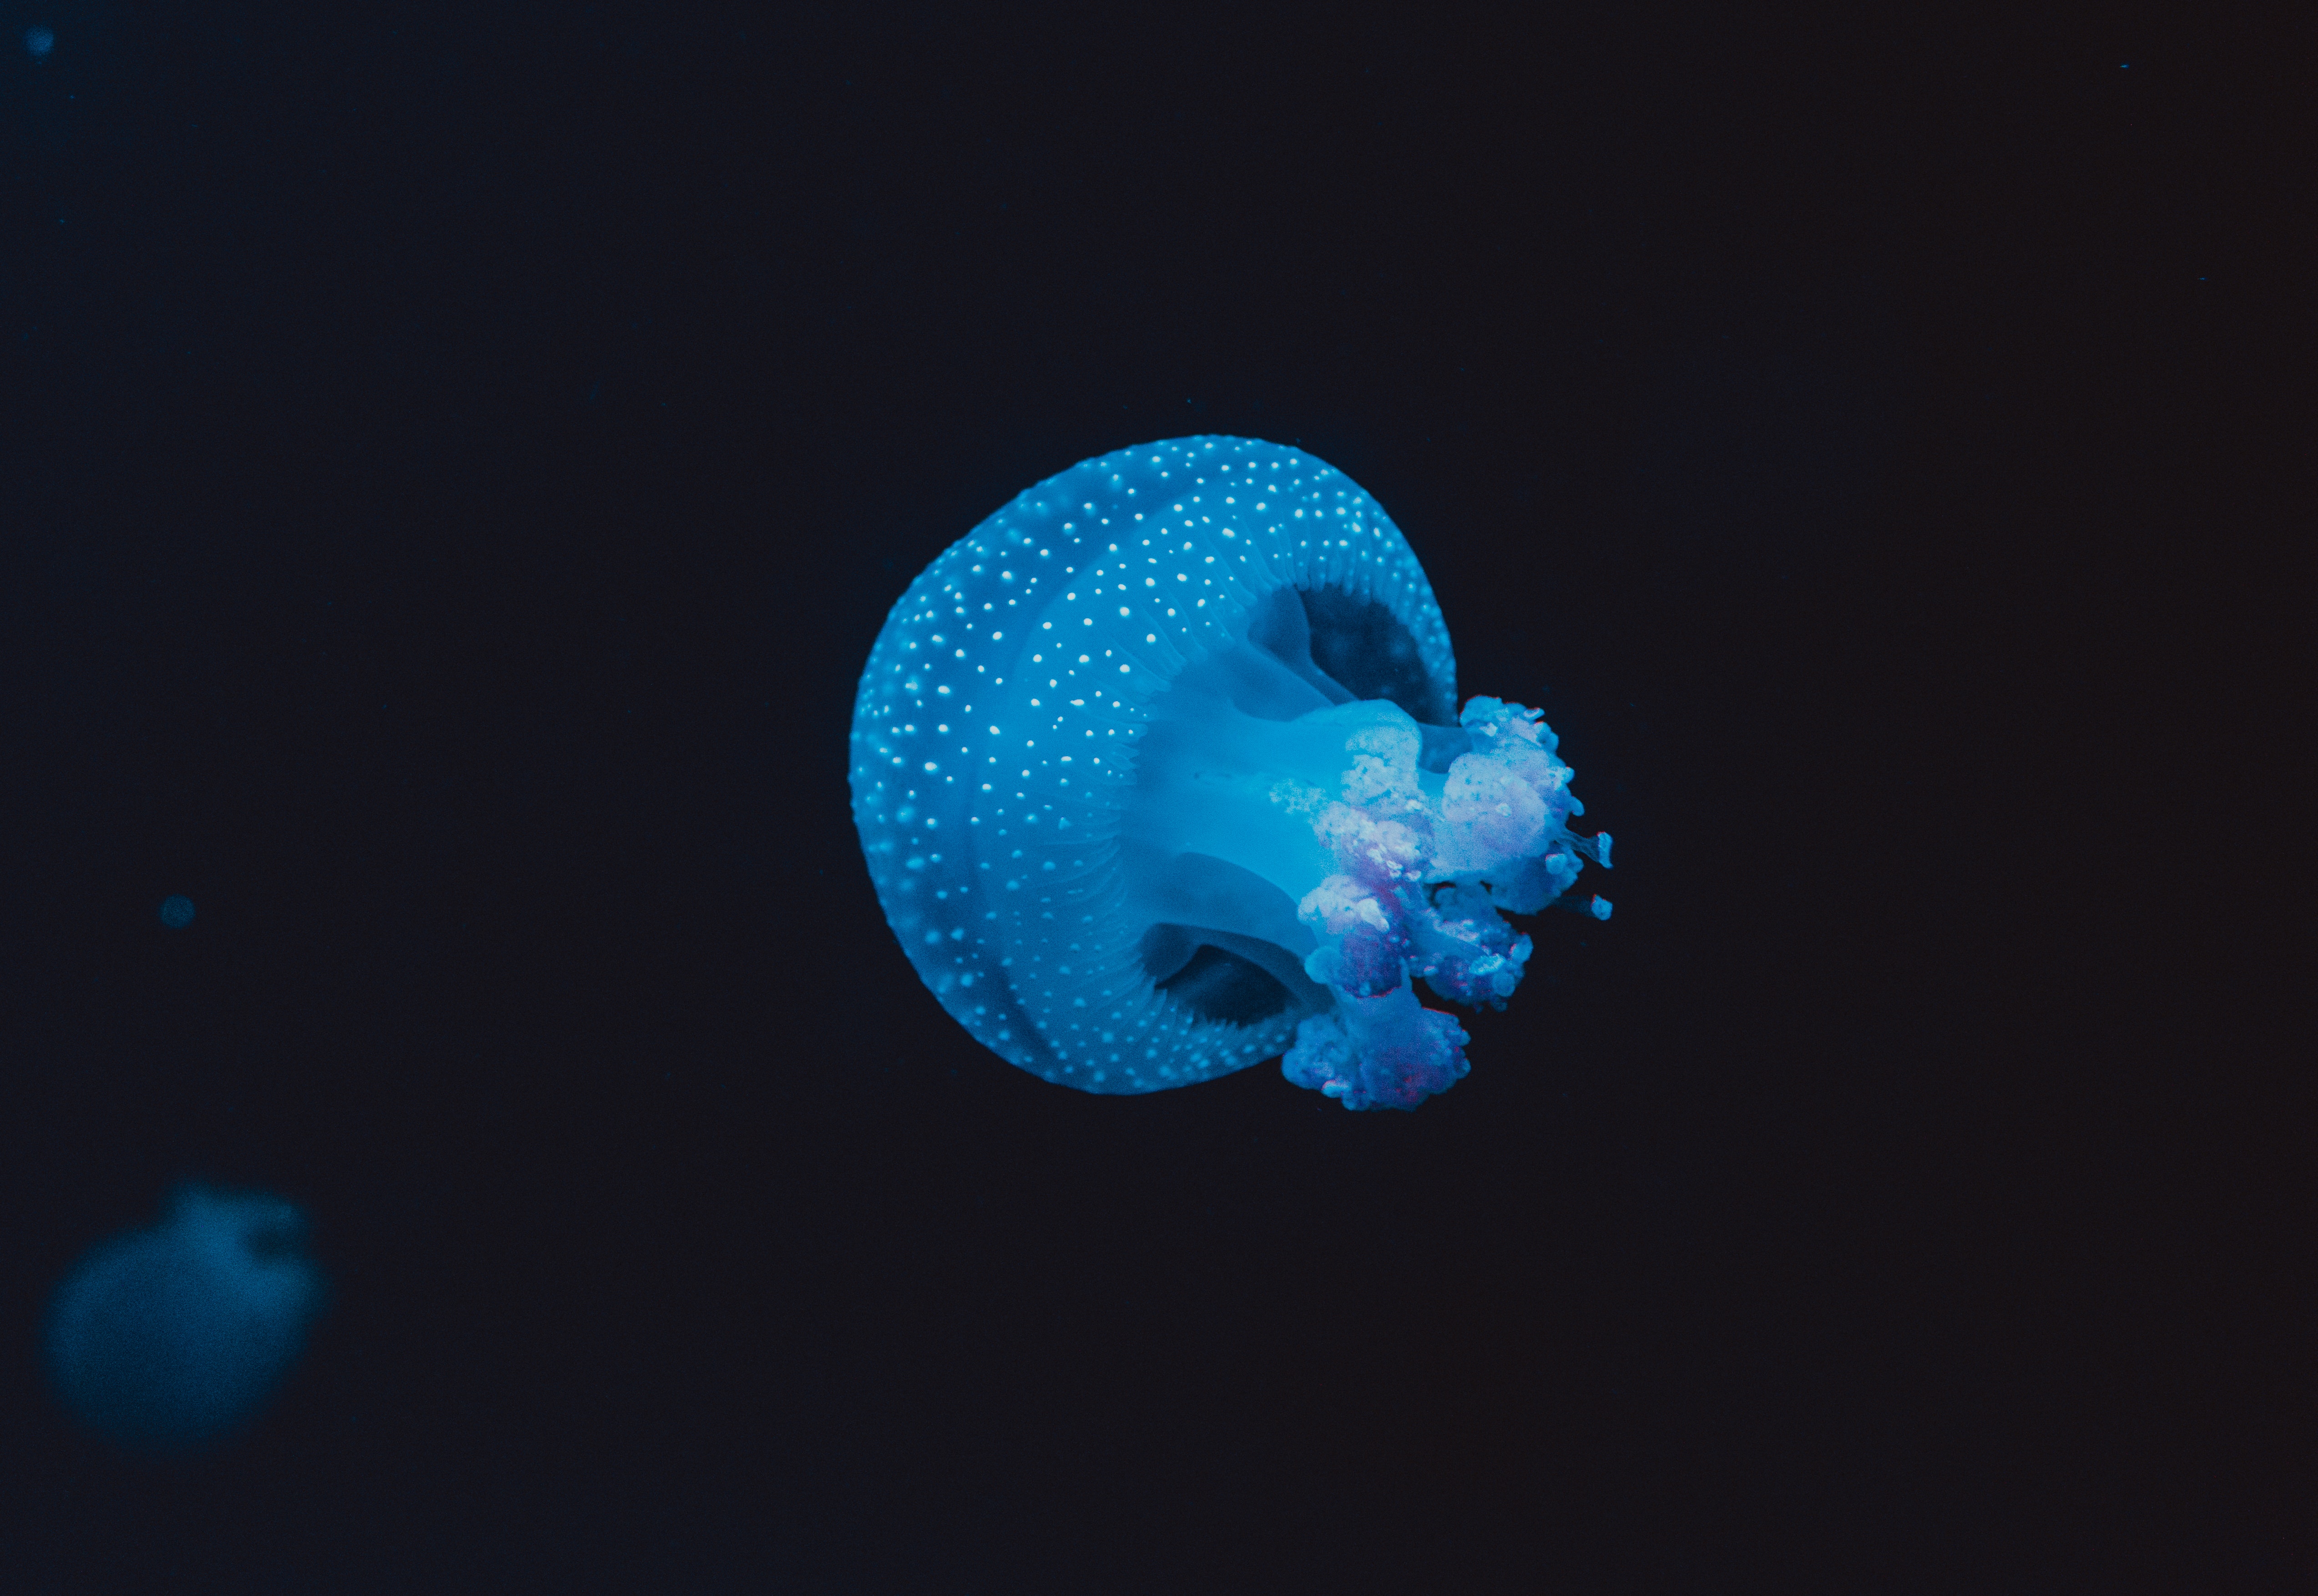 spots, tentacles, animals, jellyfish, stains, underwater world cell phone wallpapers